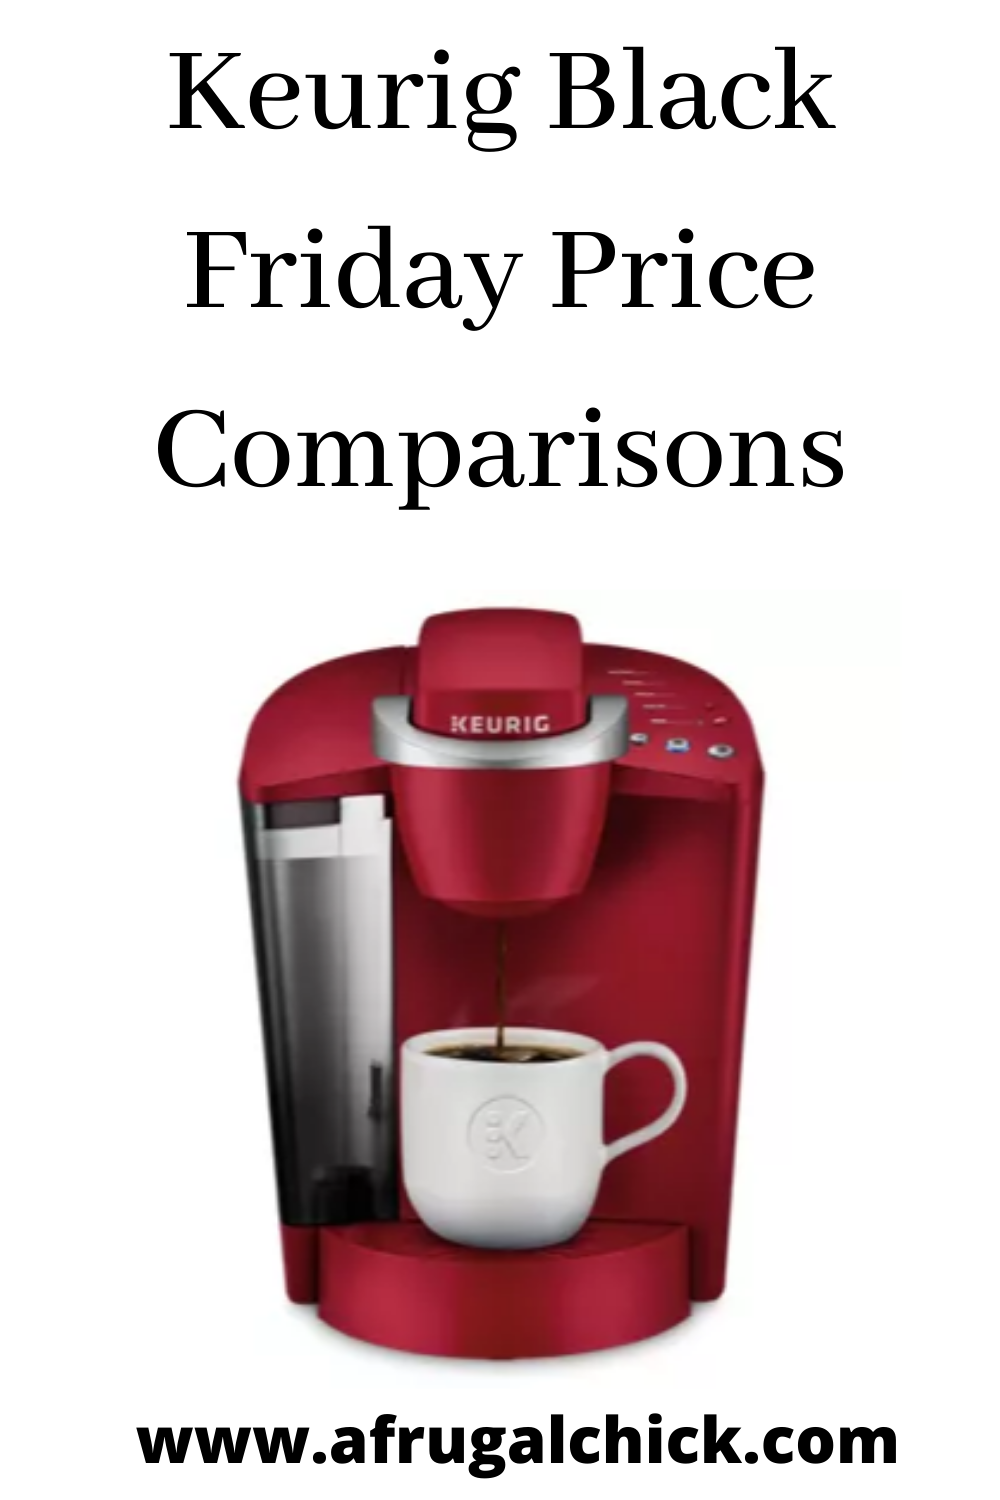 Keurig Black Friday- If you are searching for the Keurig Black Friday prices, look no further. I have all the prices here for major stores with the best sales!